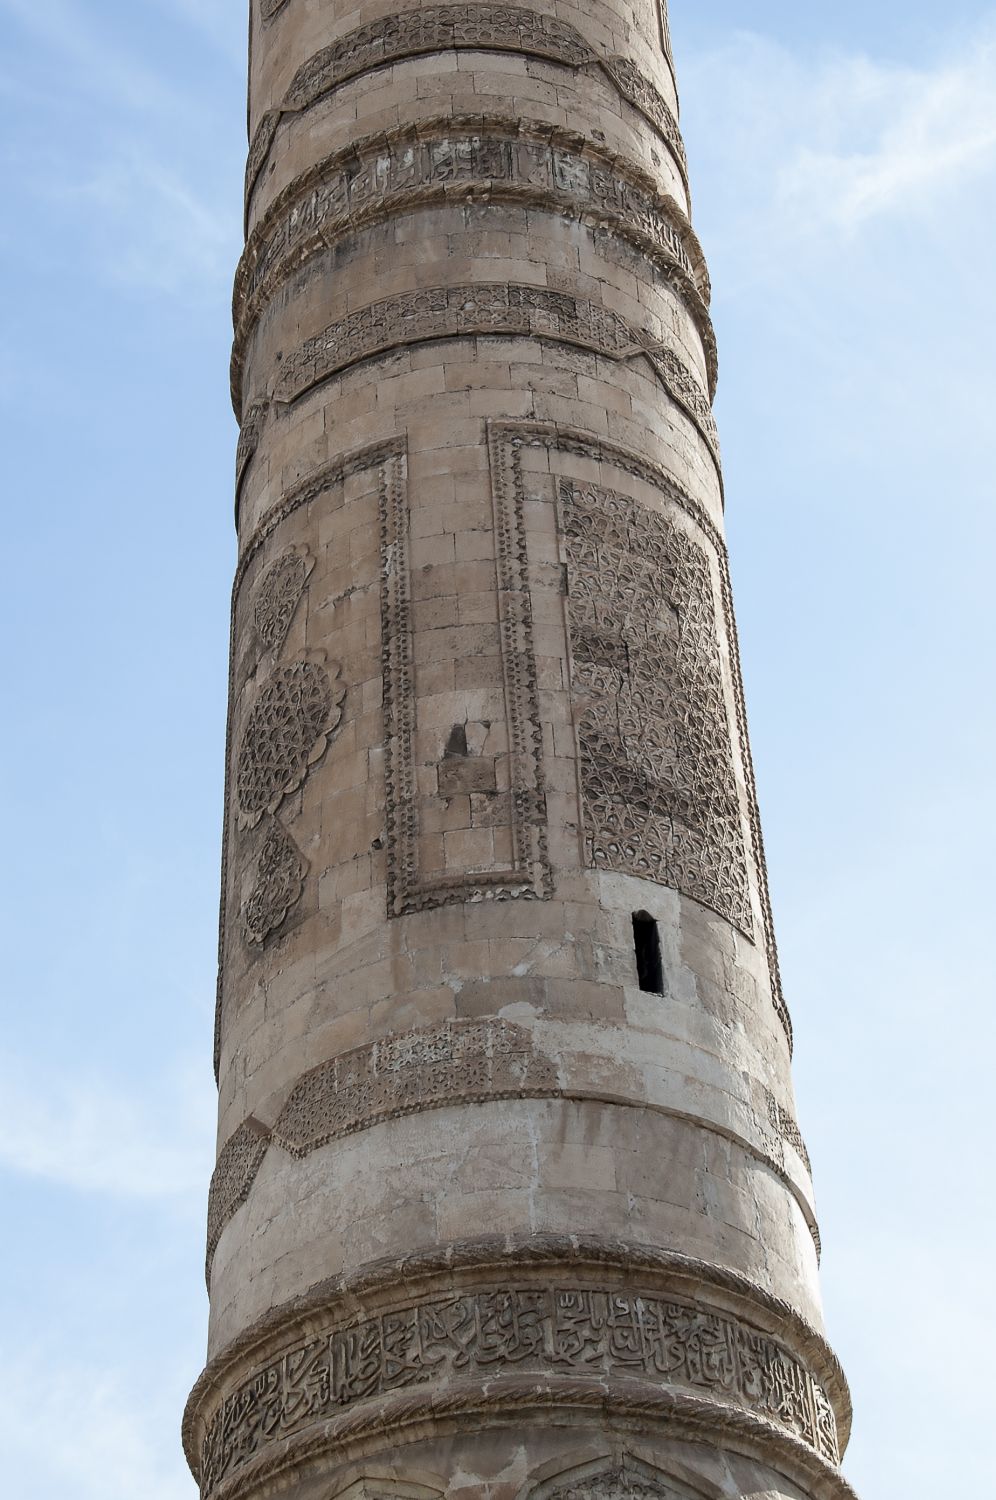 Detail view of minaret shaft showing carved ornament.